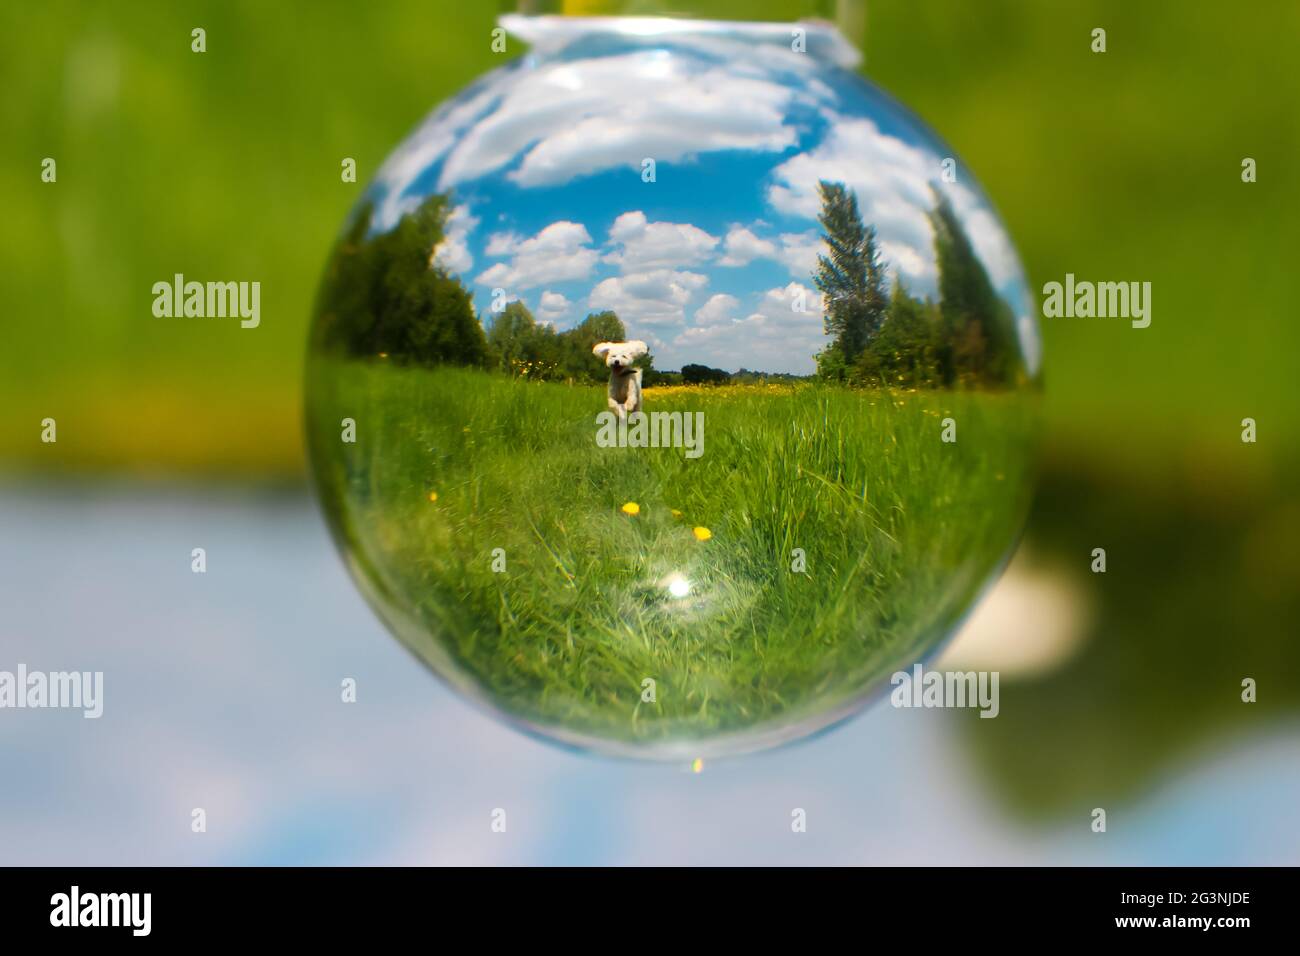 Lens ball in field with dog Stock Photo